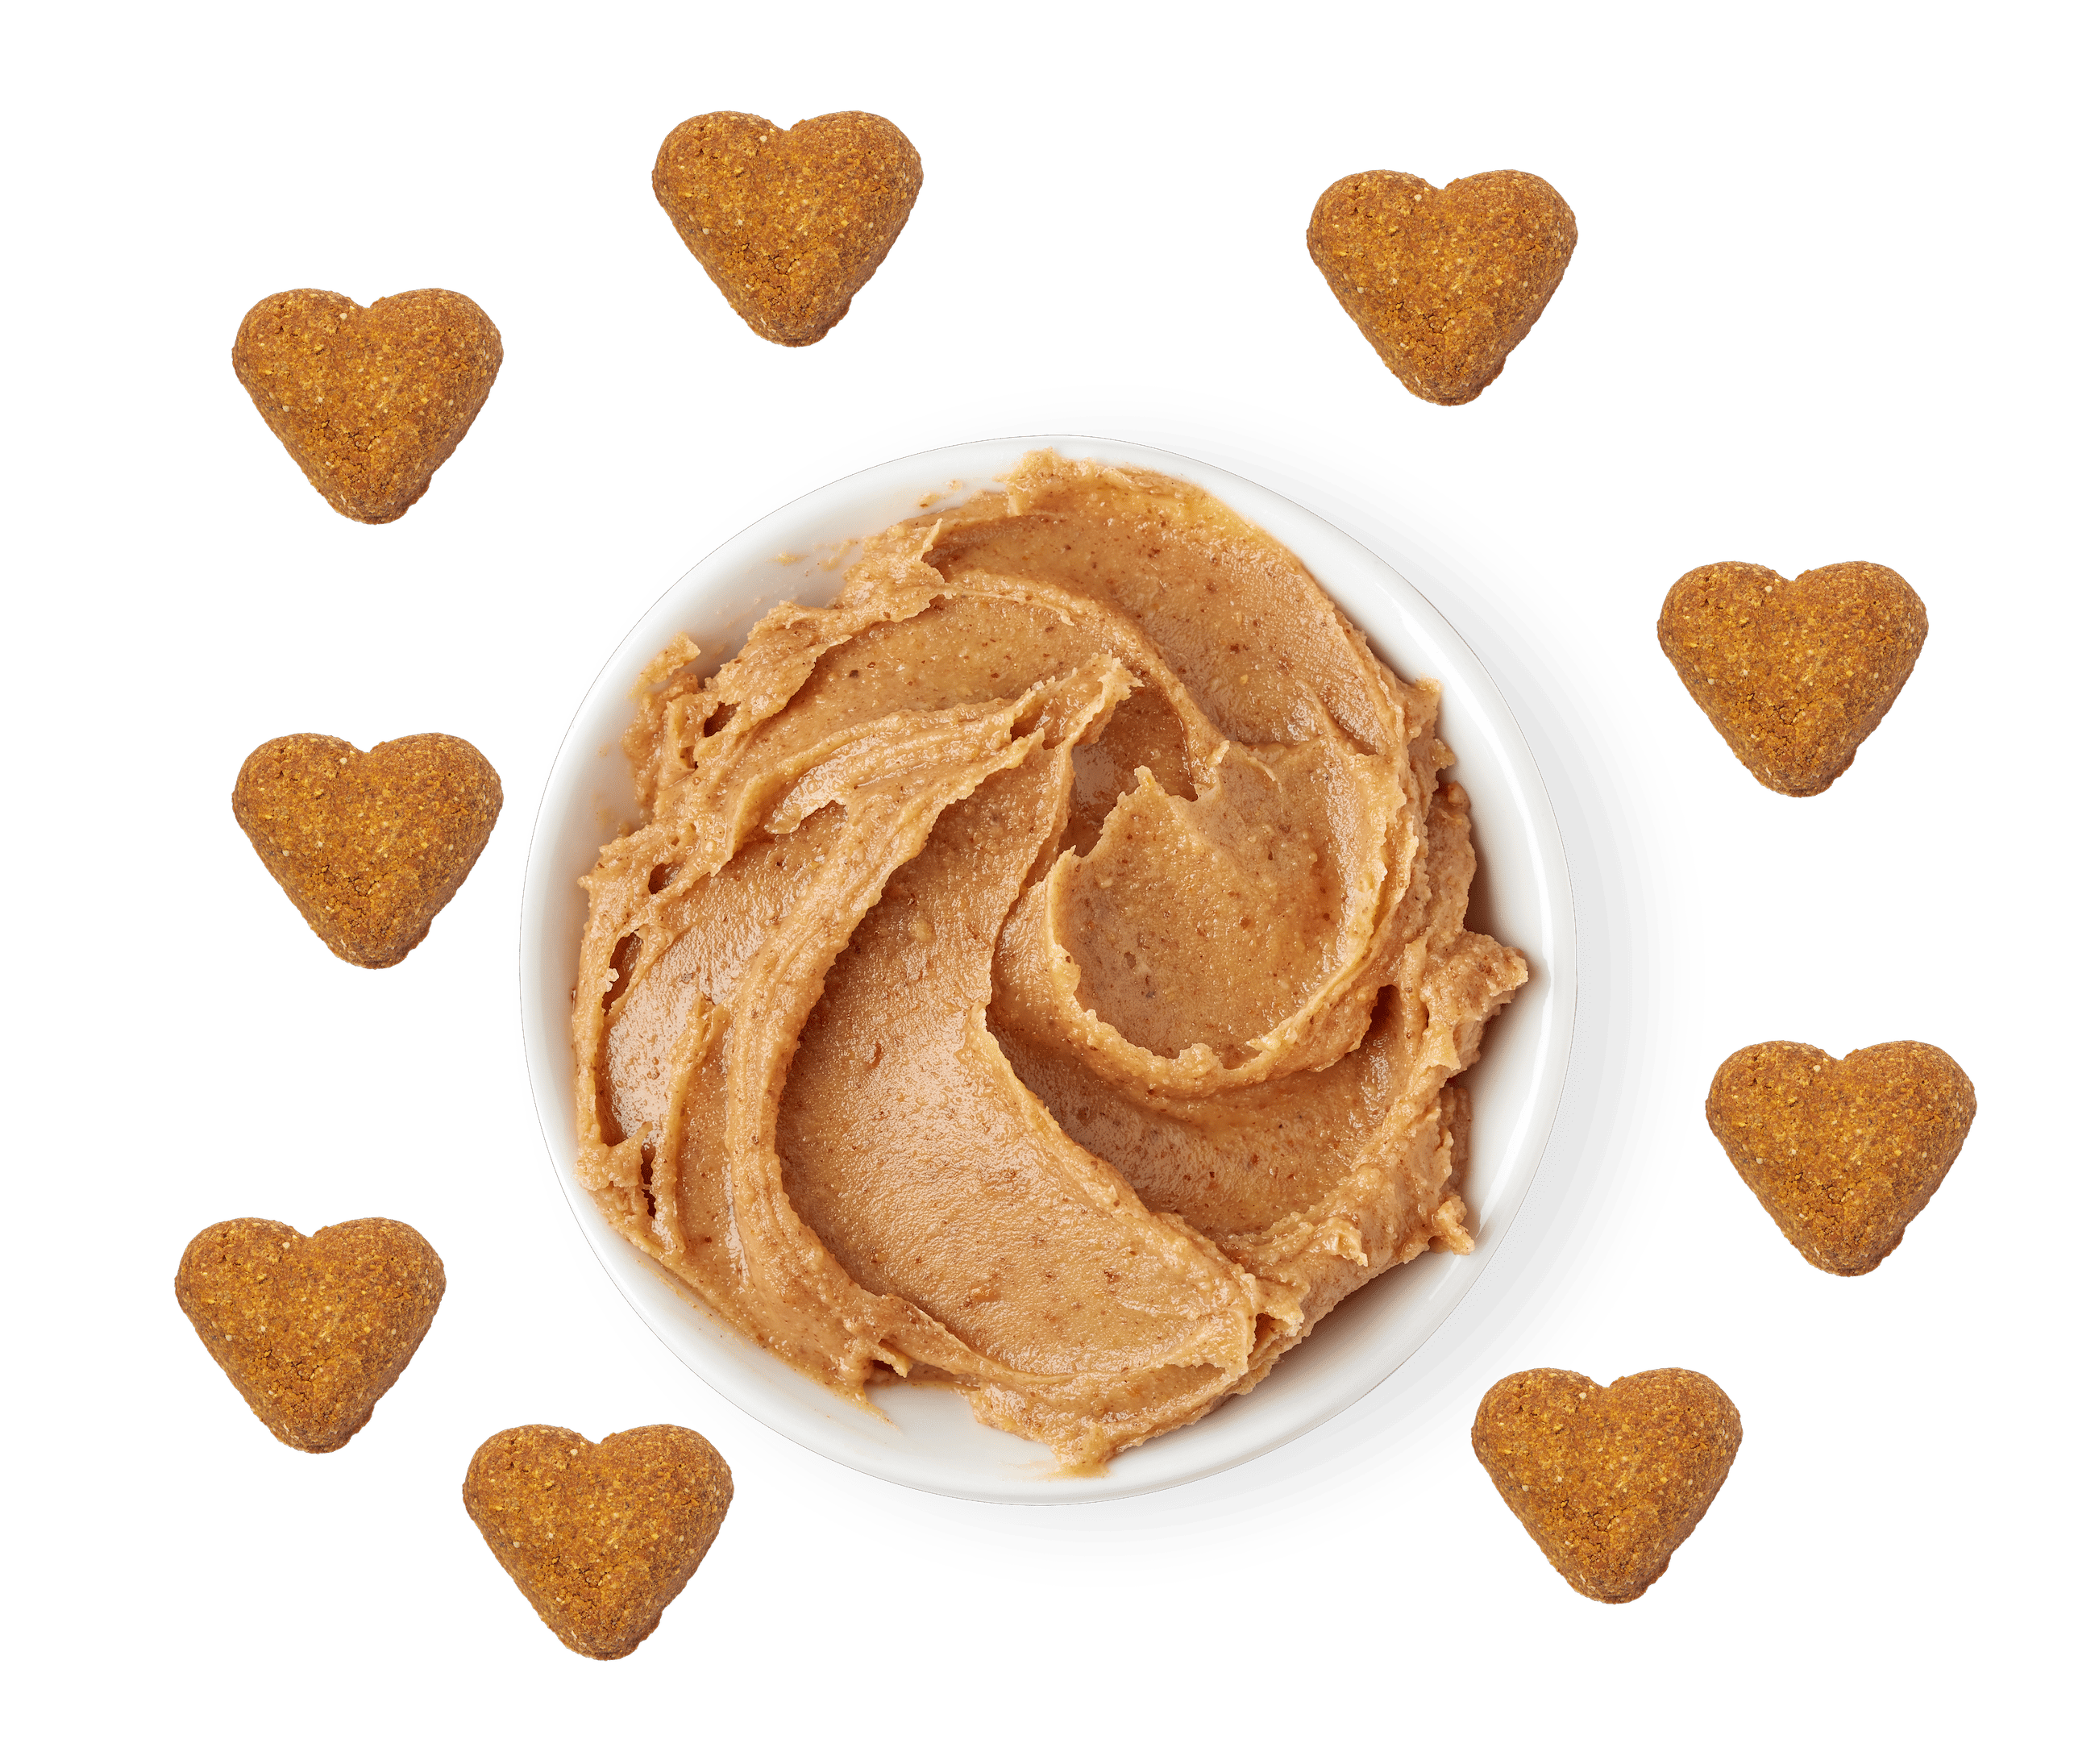 GRAIN FREE with Peanut Butter